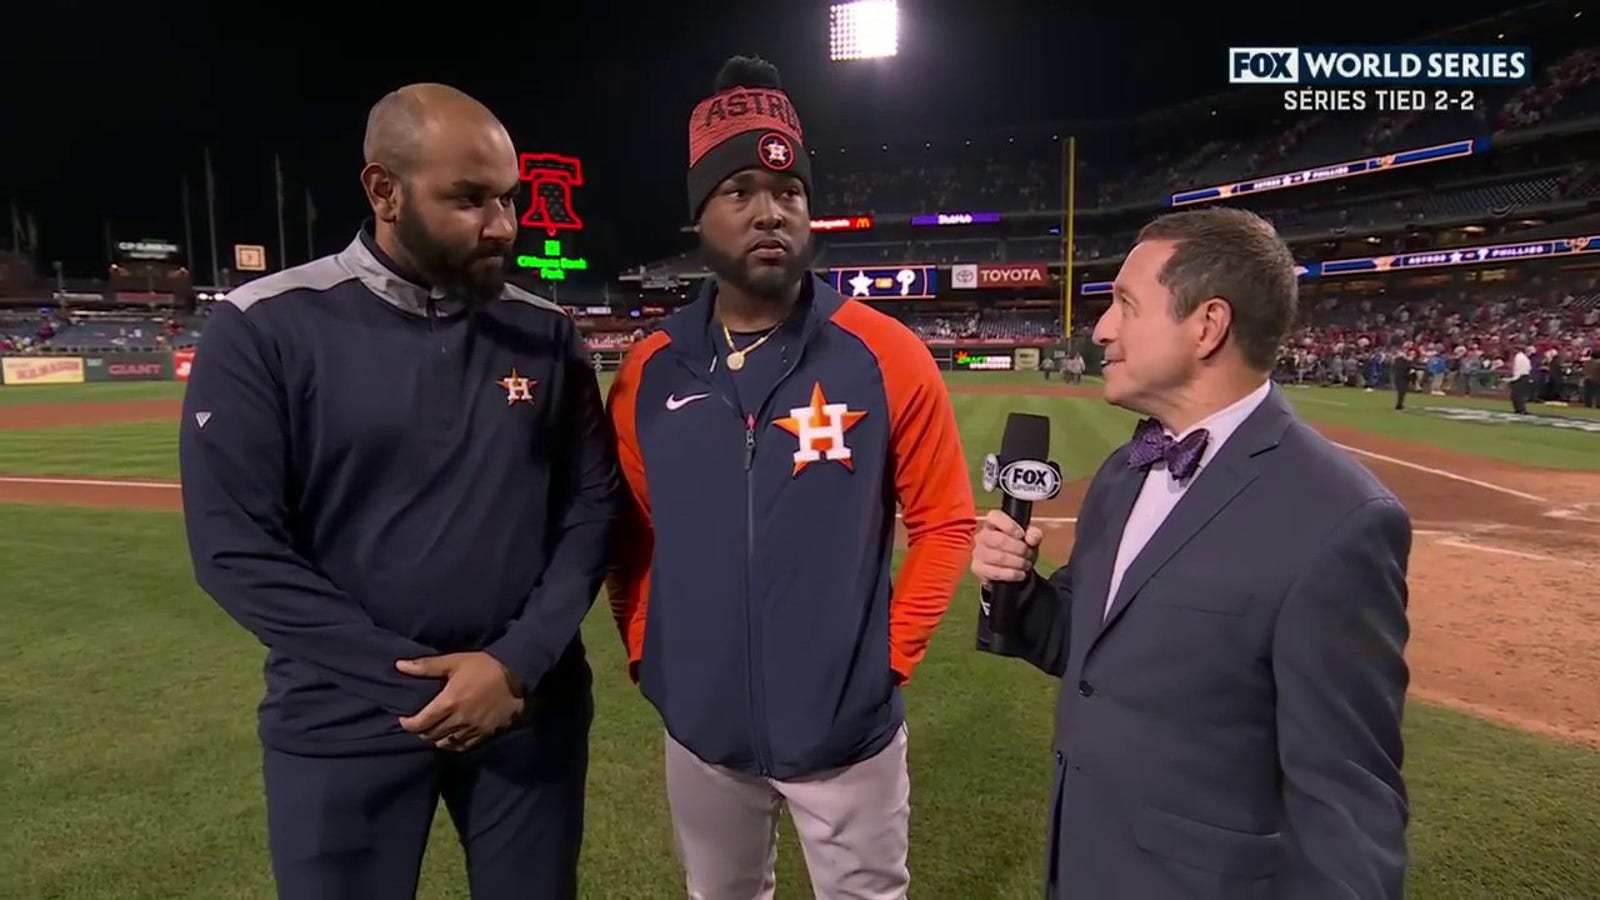 Beryl TV play-6014e37250003ea--26361673014 2022 World Series: Astros' Cristian Javier dazzles in combined no-hitter Sports 